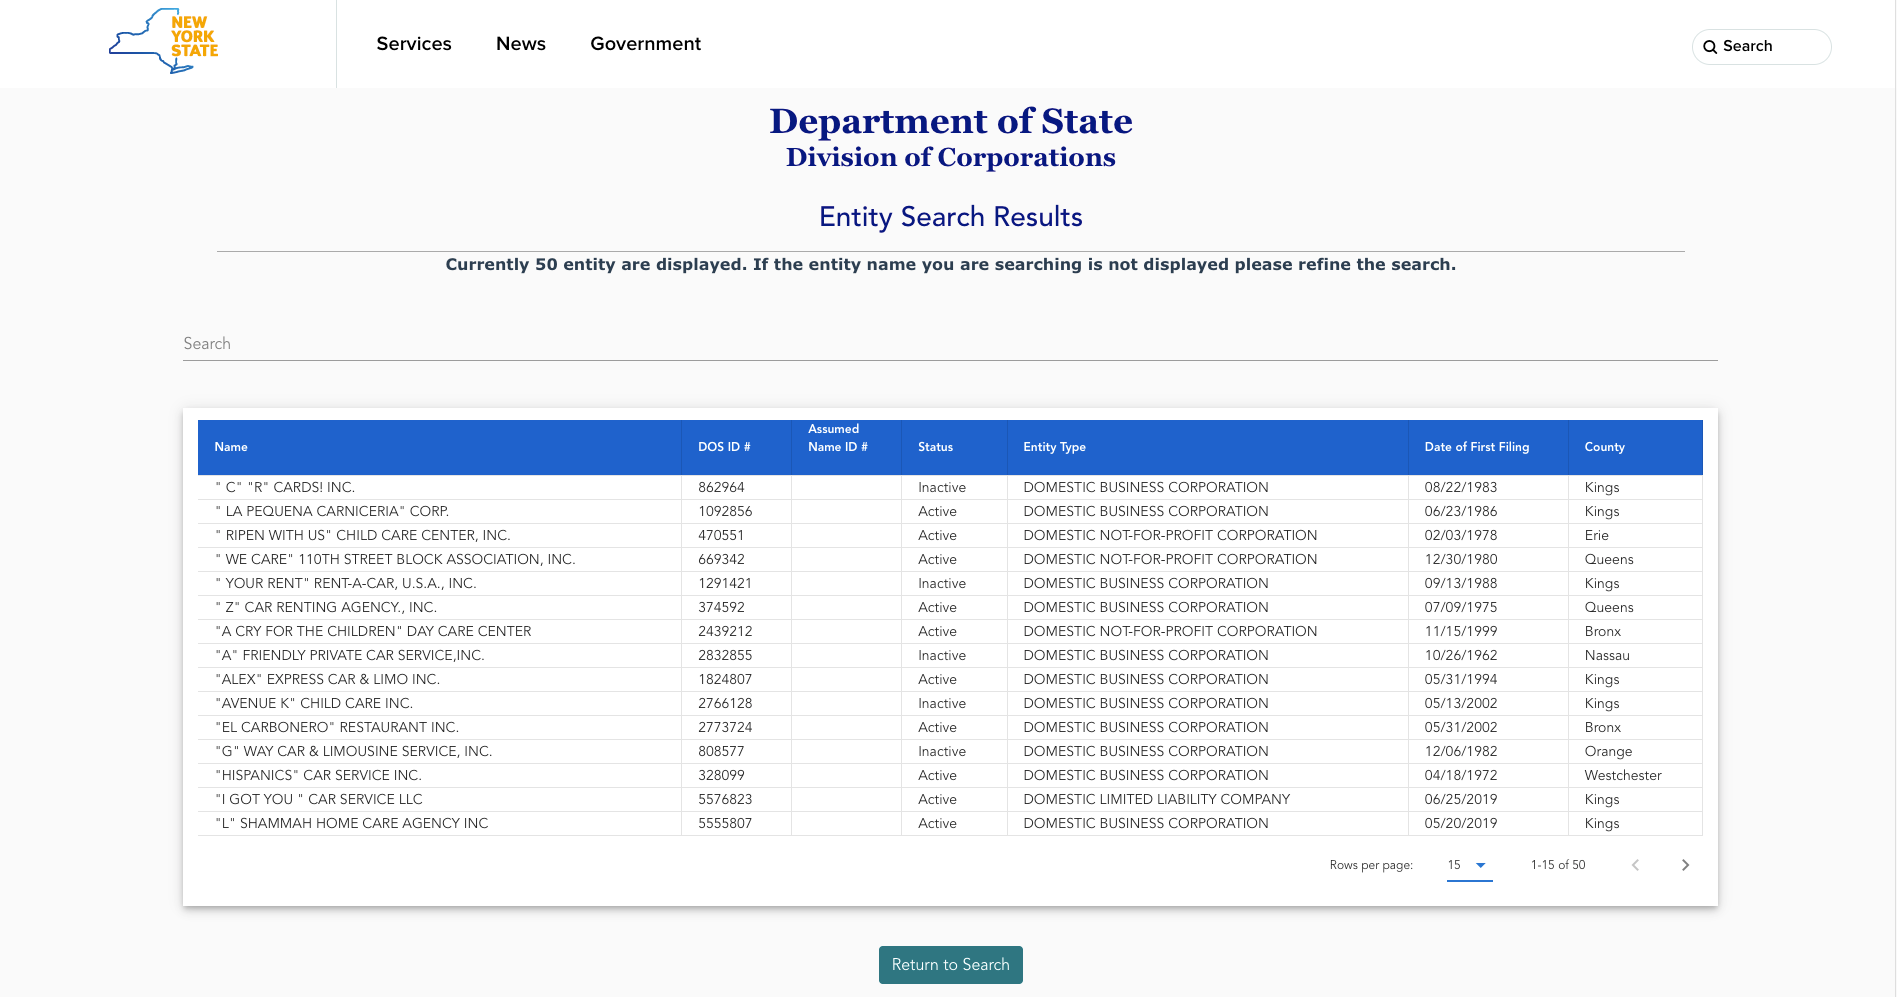 Analyzing the New York Secretary of State Business Search Results